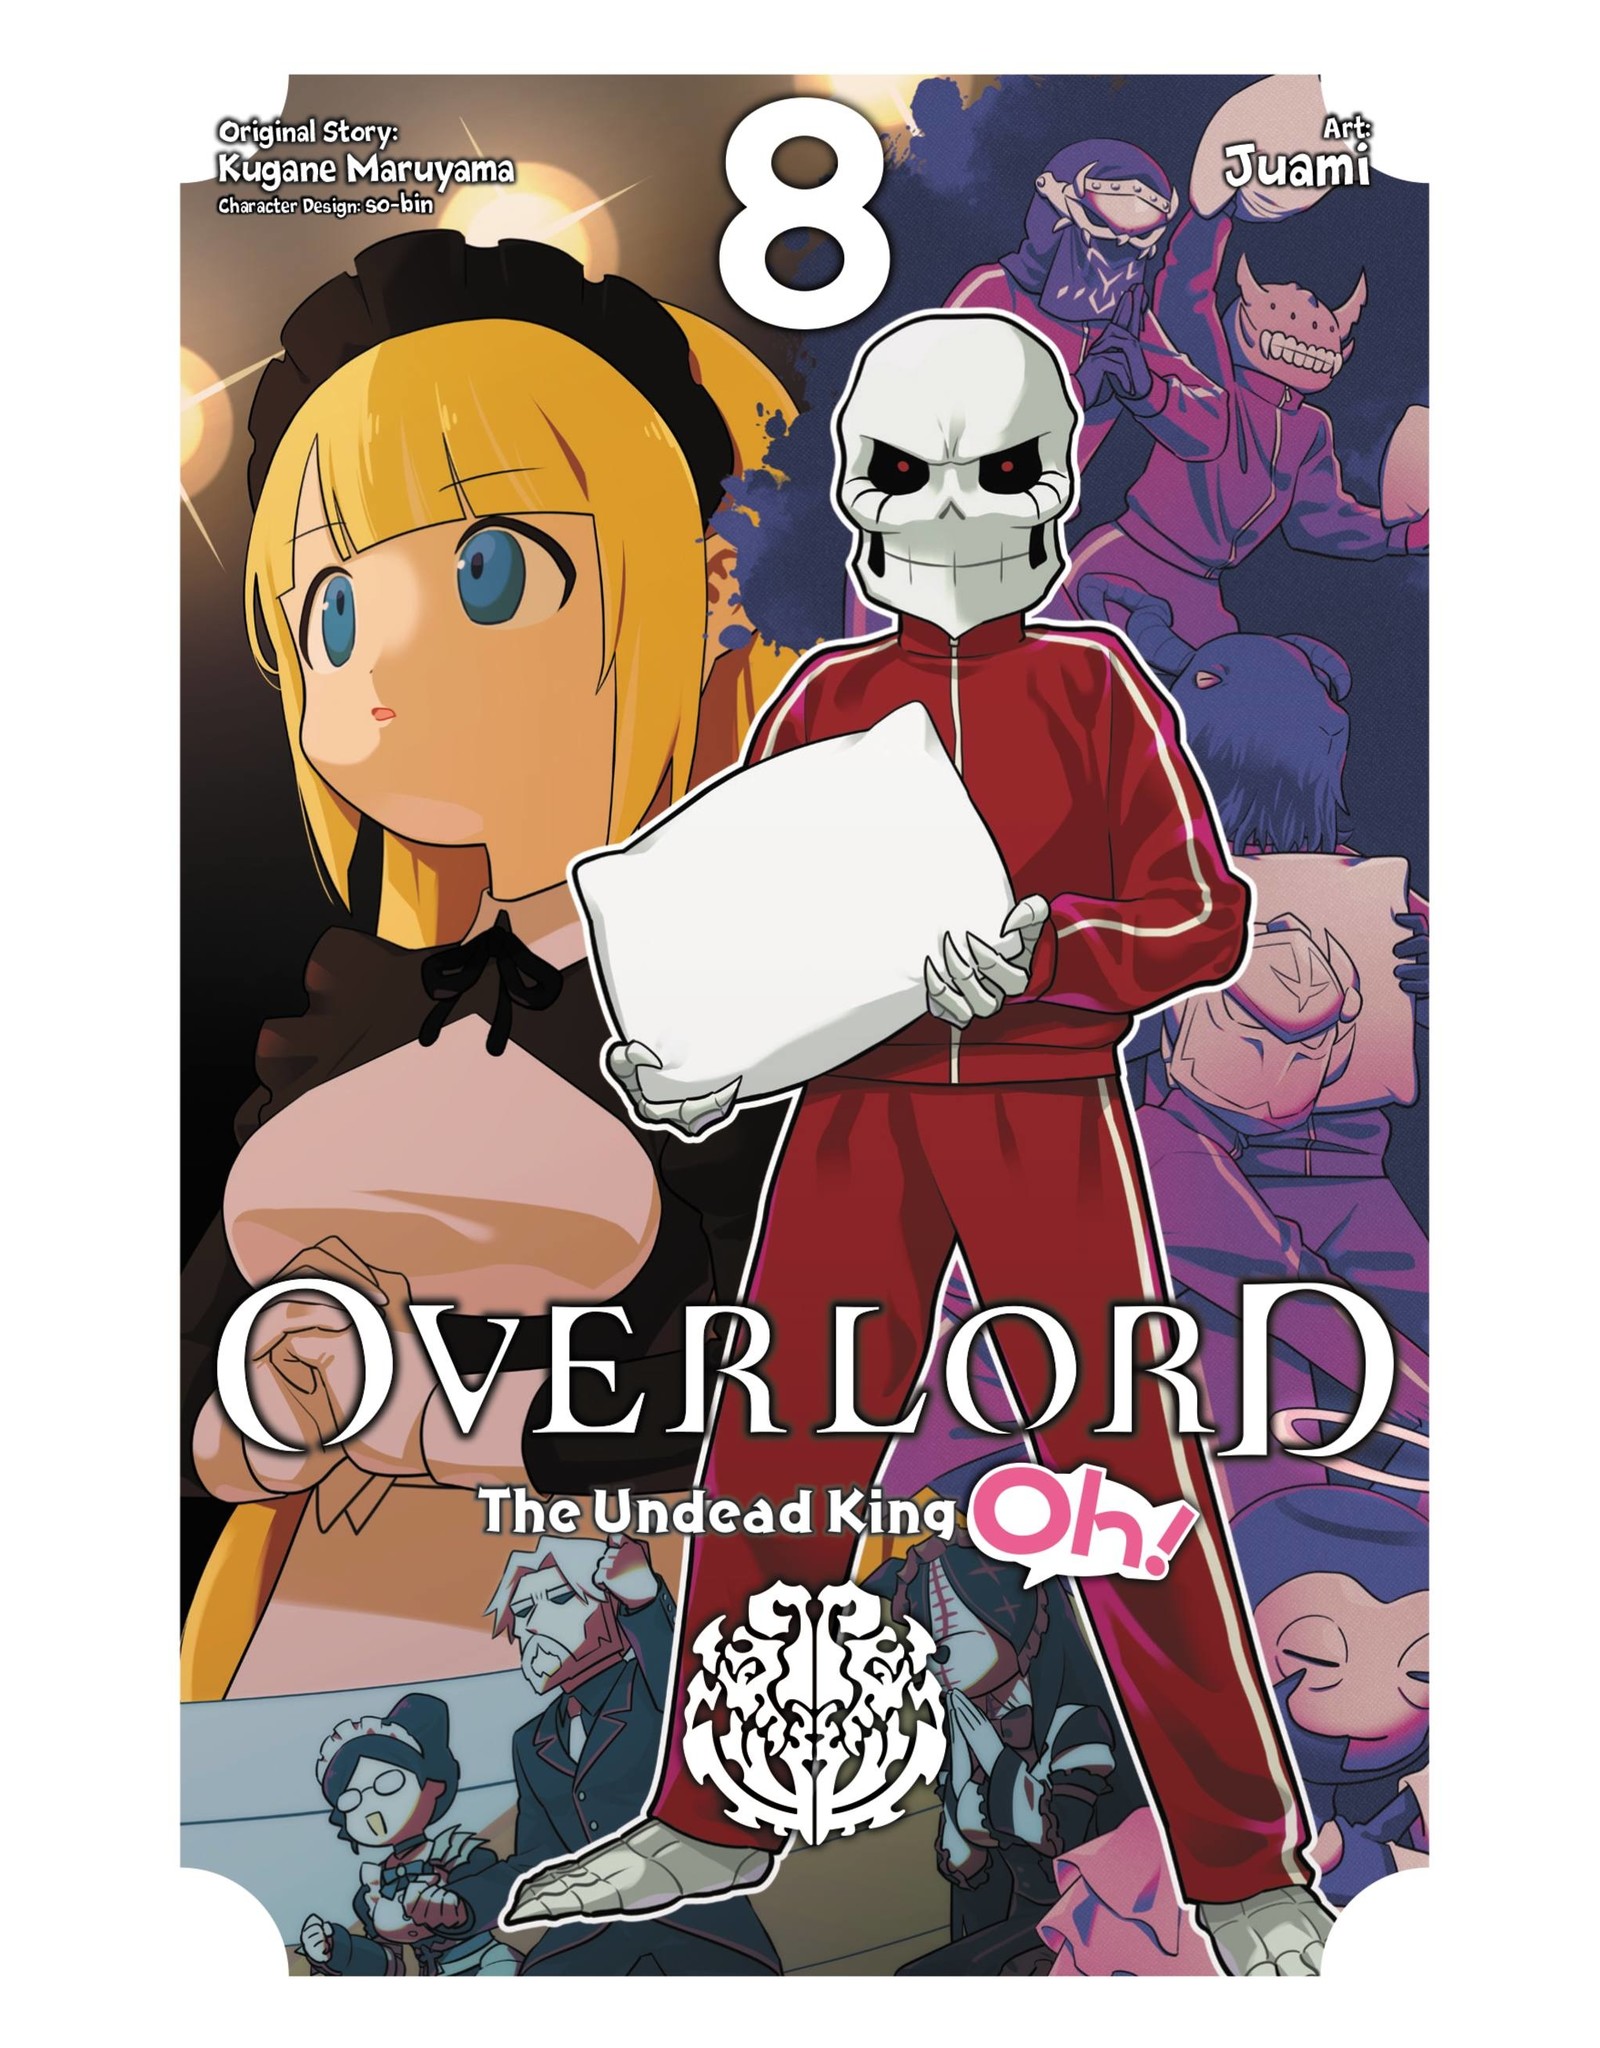 Overlord: The Undead King Oh! 08 (English) - Manga